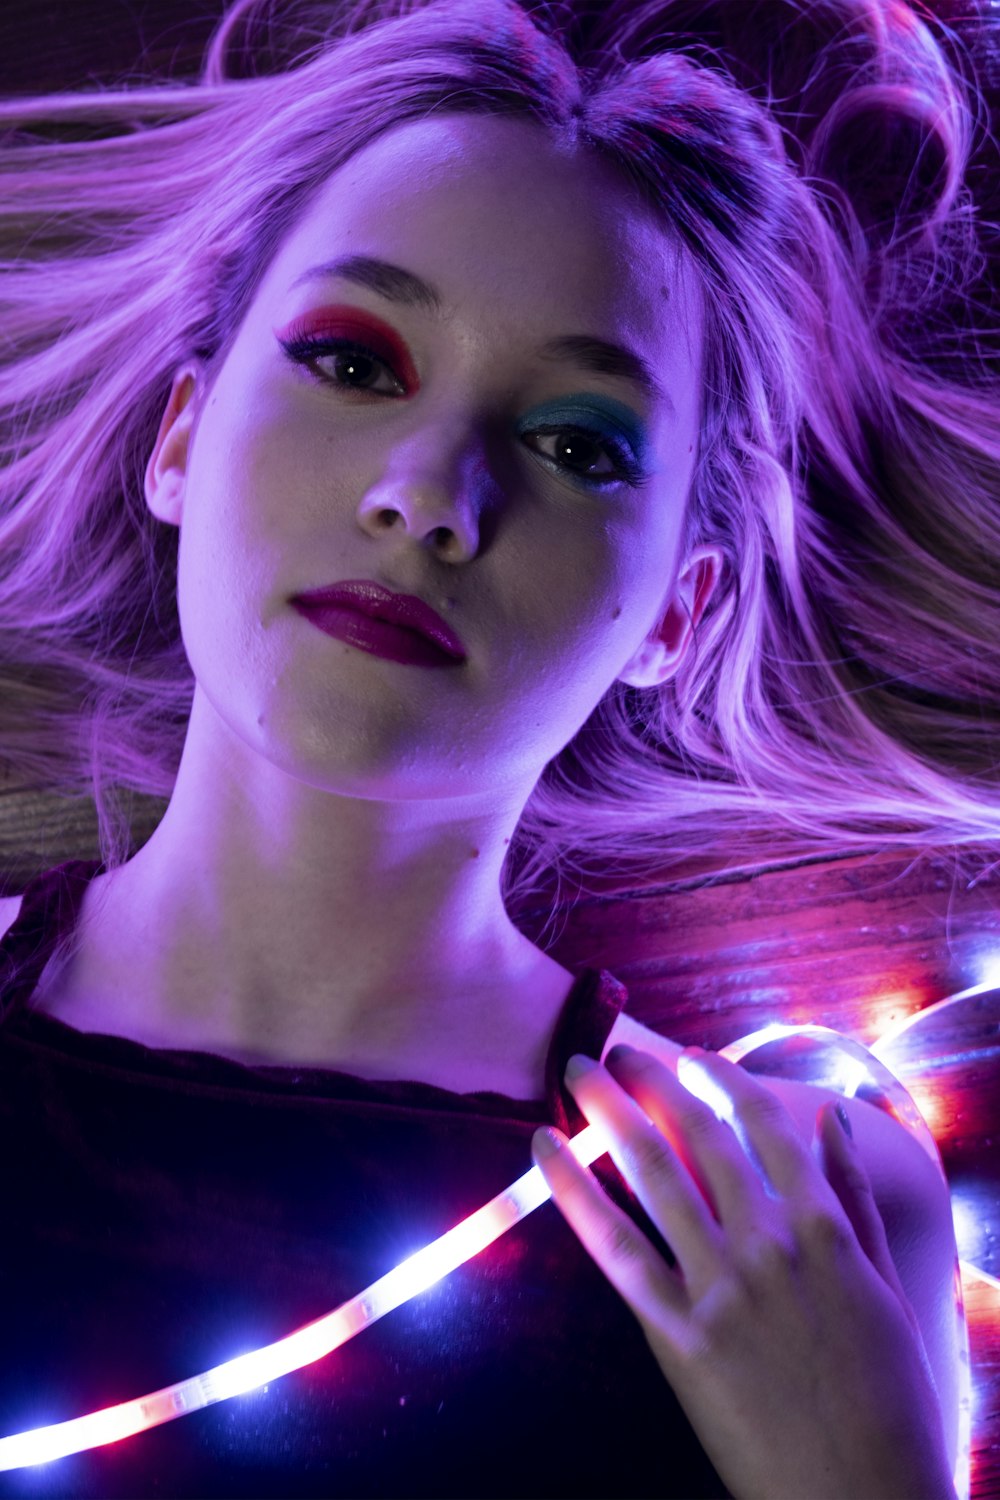 a woman with long blonde hair and bright lights